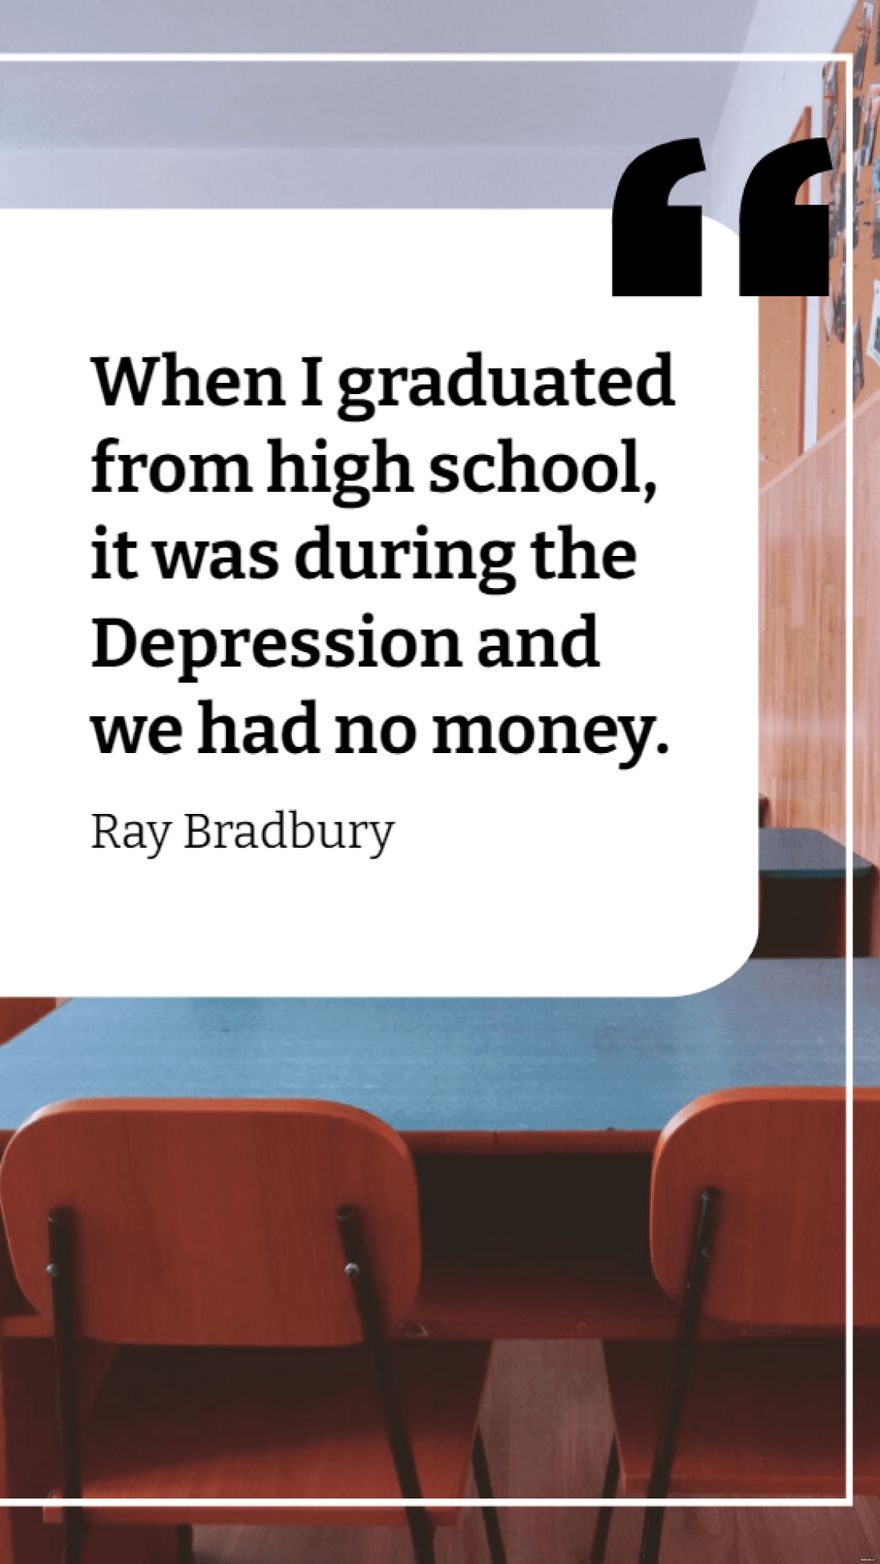 Ray Bradbury - When I graduated from high school, it was during the Depression and we had no money.